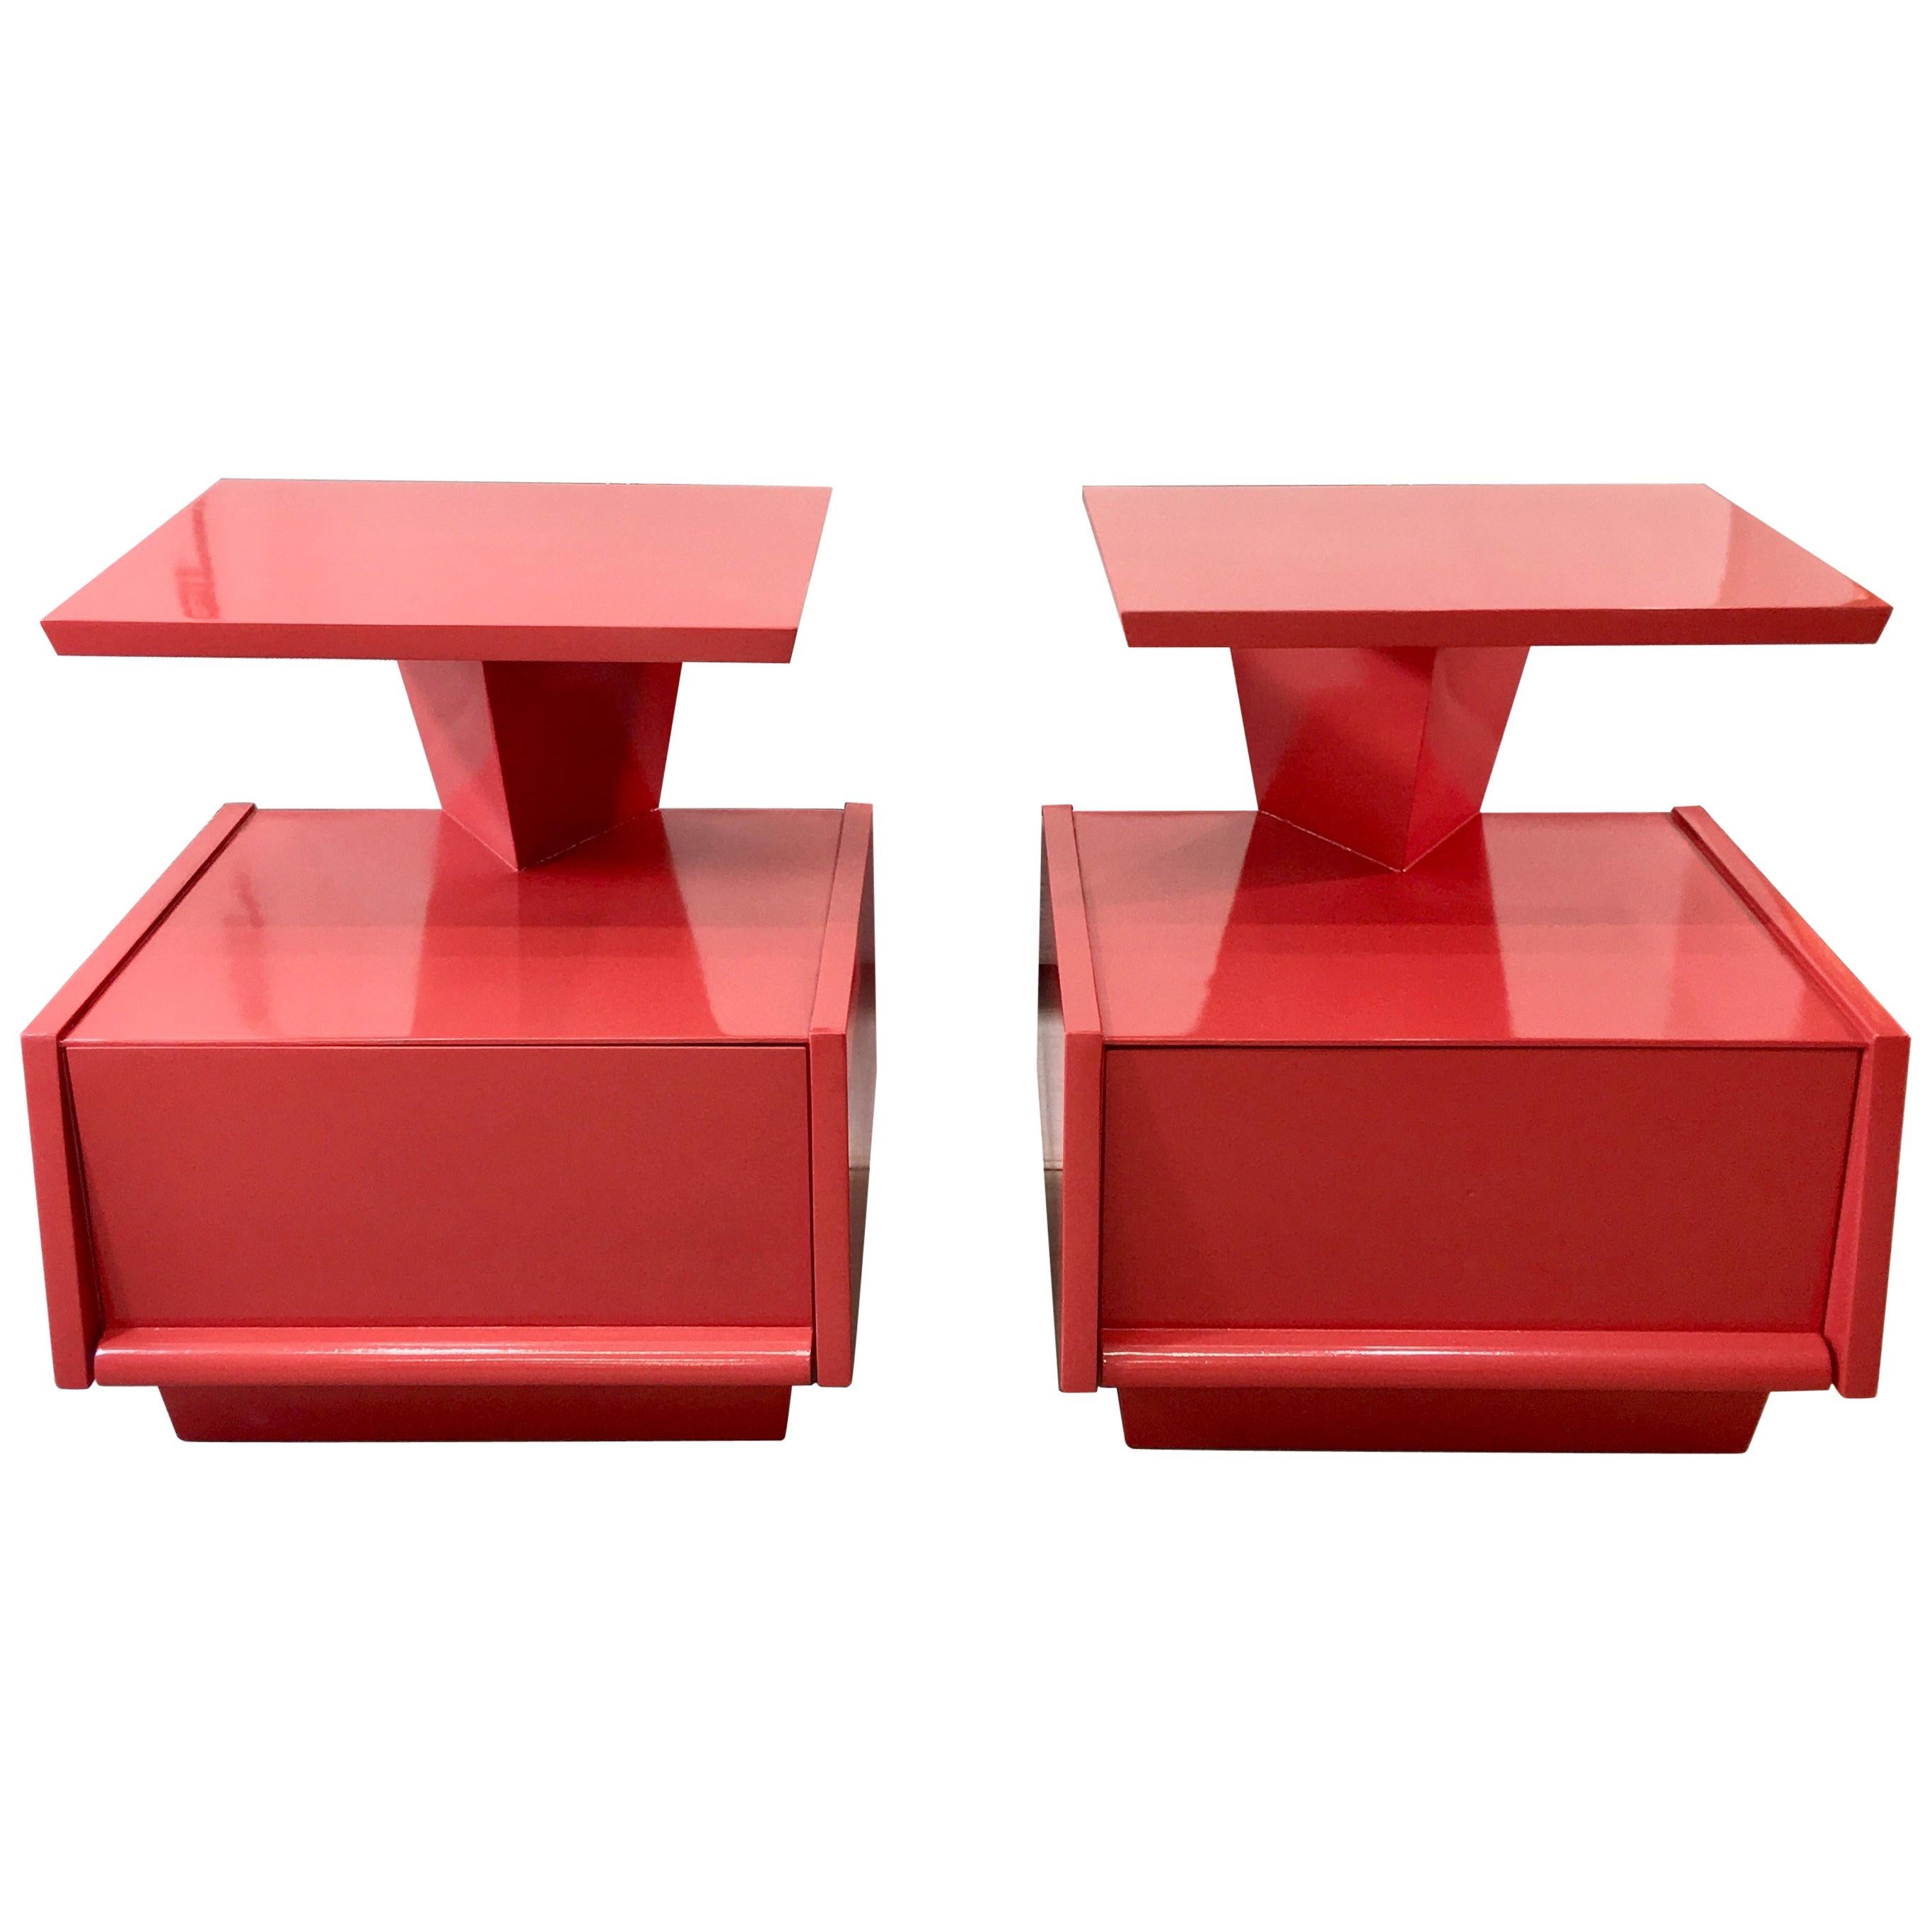 Pair of Futuristic 1950s Lacquered Nightstands by Mengel